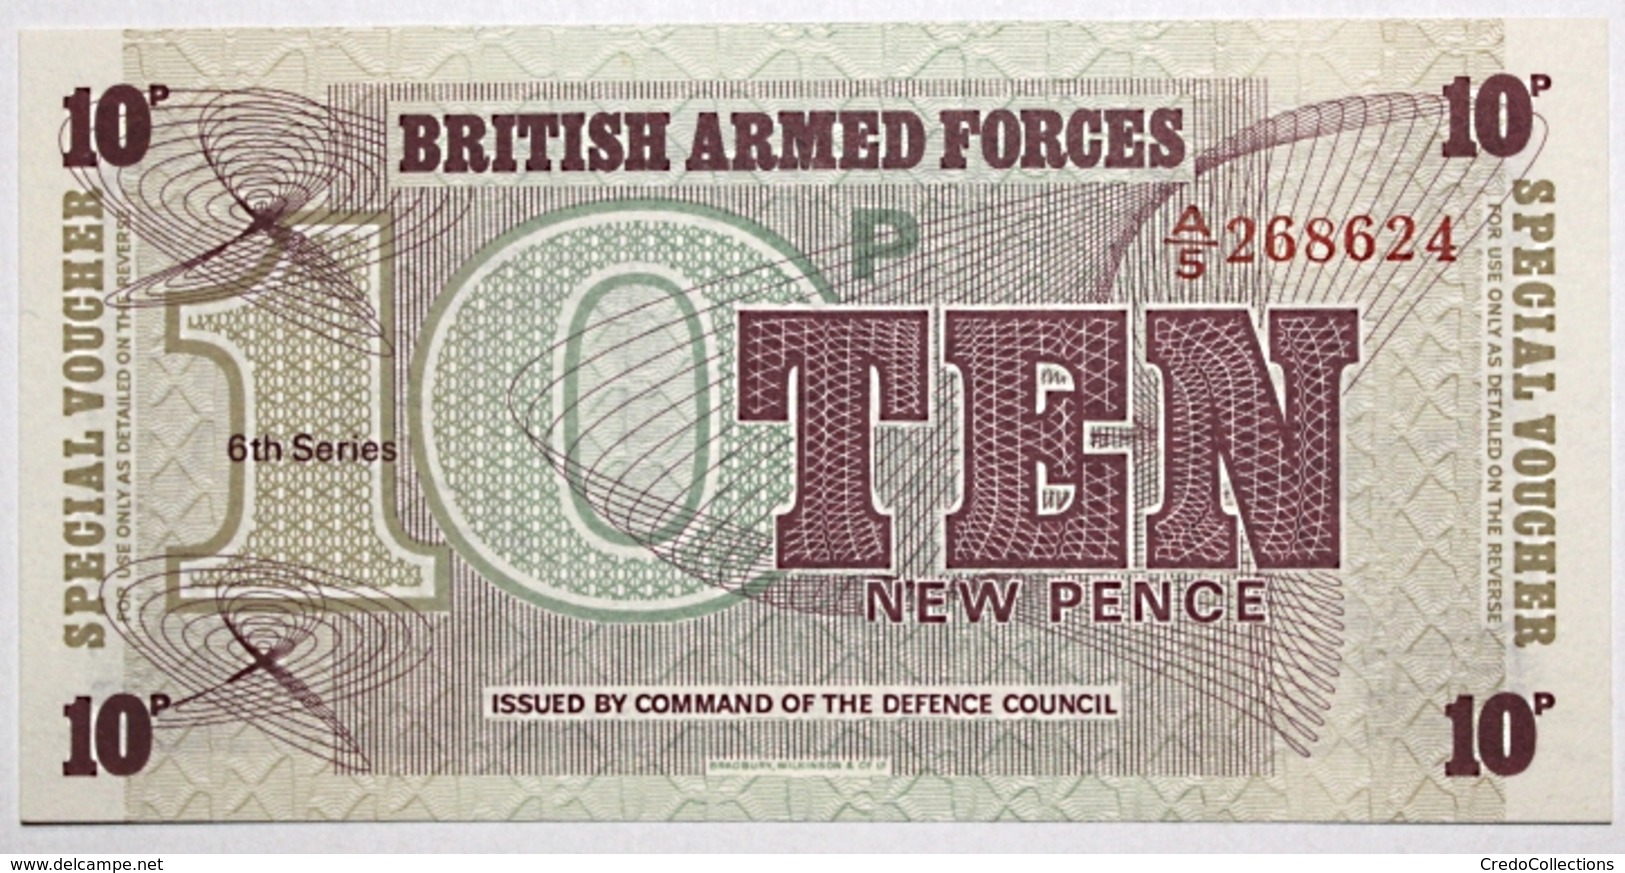 Grande-Bretagne - 10 New Pence - 1972 - PICK M48 - NEUF - British Armed Forces & Special Vouchers